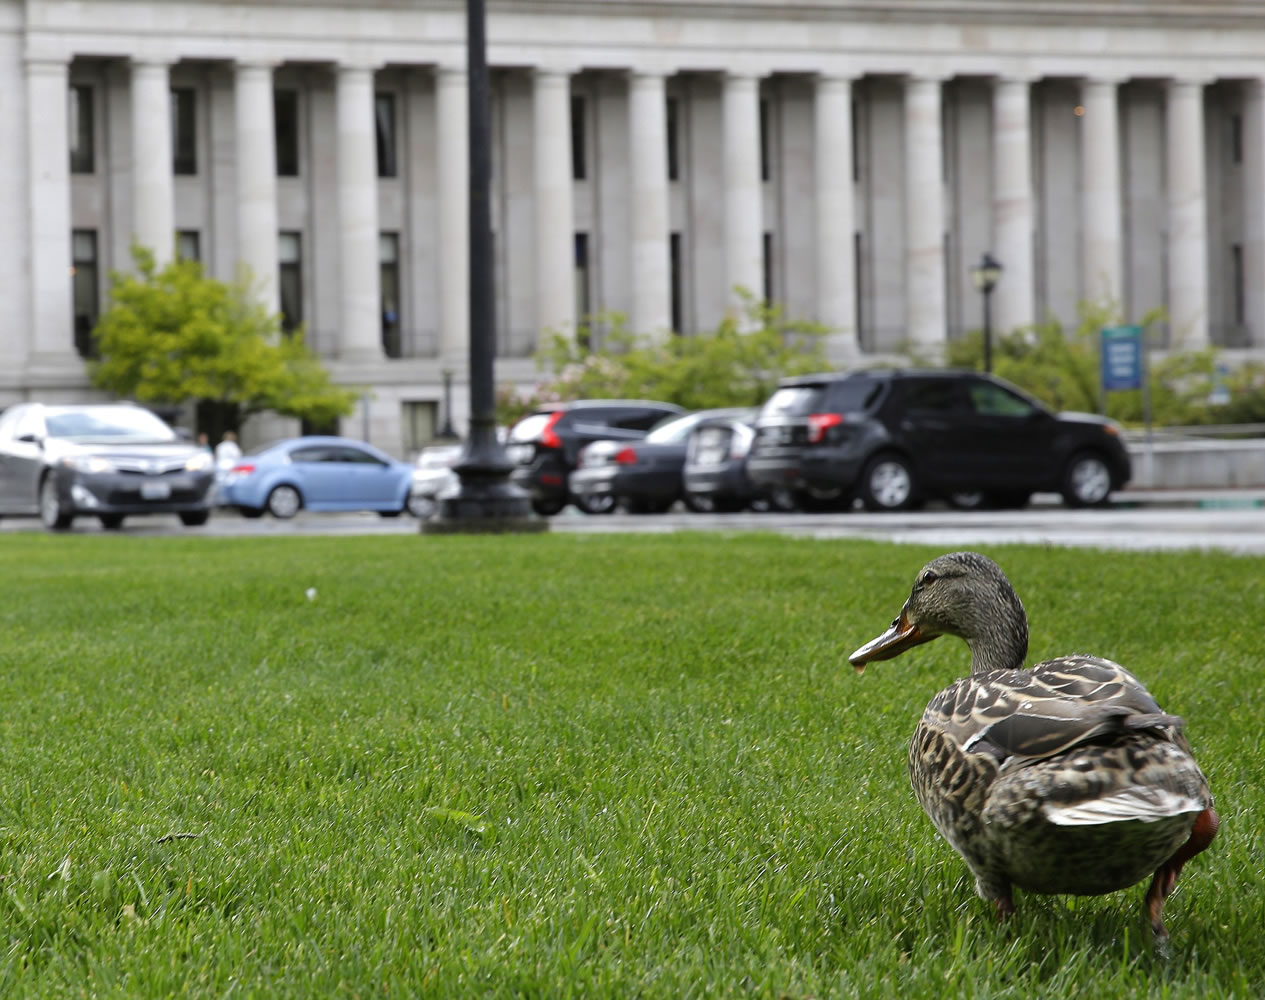 A duck walks on the grass near the legislative building Friday at the Capitol in Olympia.